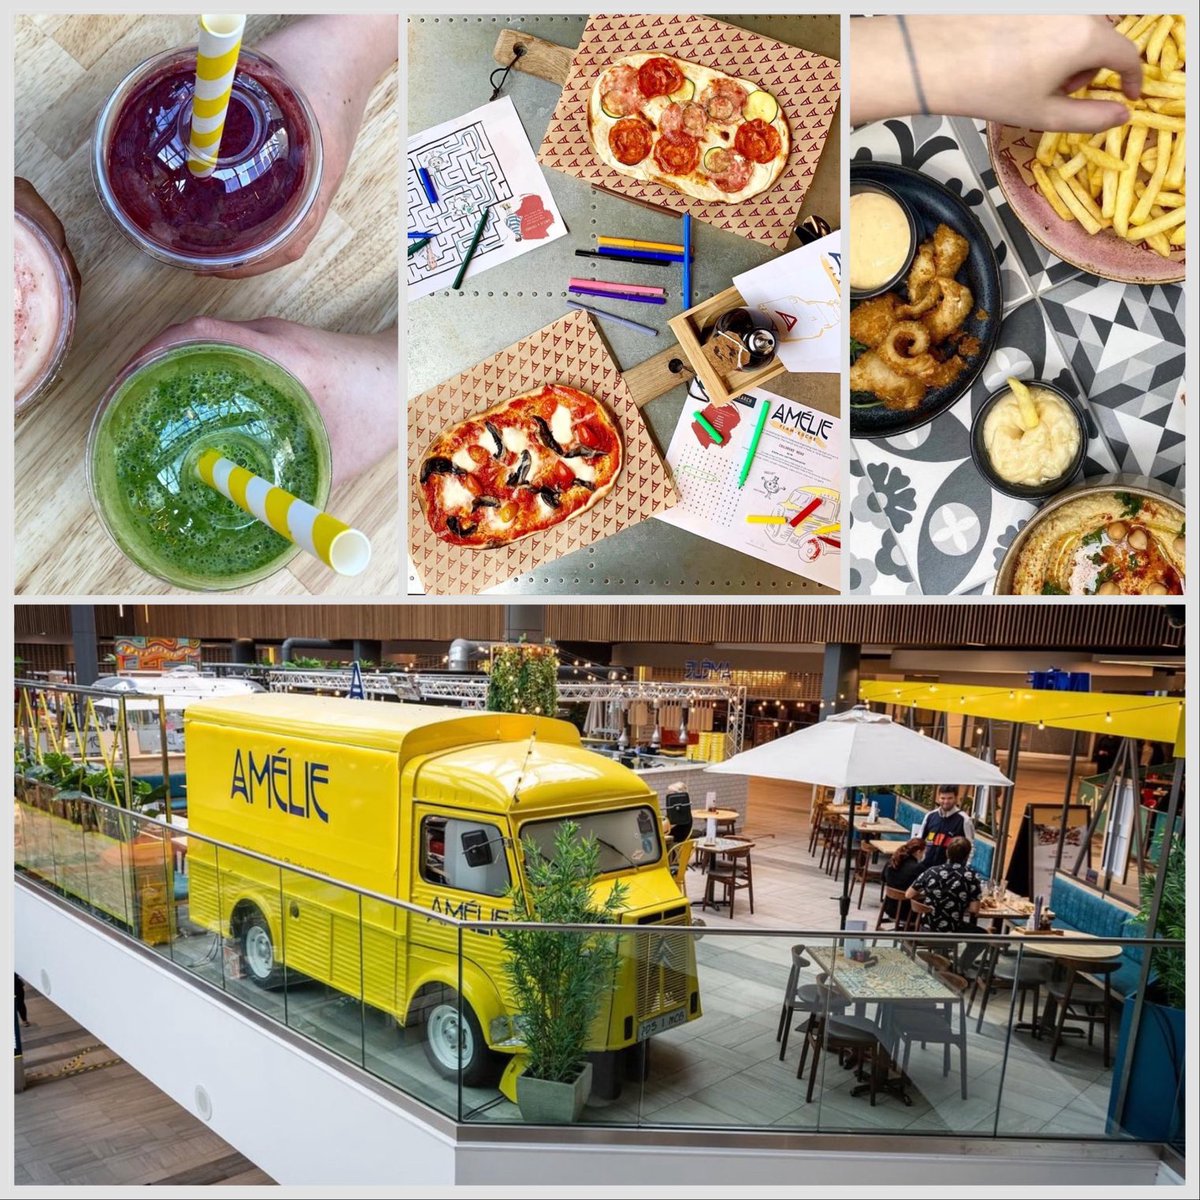 Bonjour! Entertaining the kids in Cambridge this half term & need a bite to eat? Kids love our skinny pizzas and they eat for free 😀 You’ll find us outside The Vue #kidseatfree #kidsfood #pizza #cambridge #halfterm #smoothies